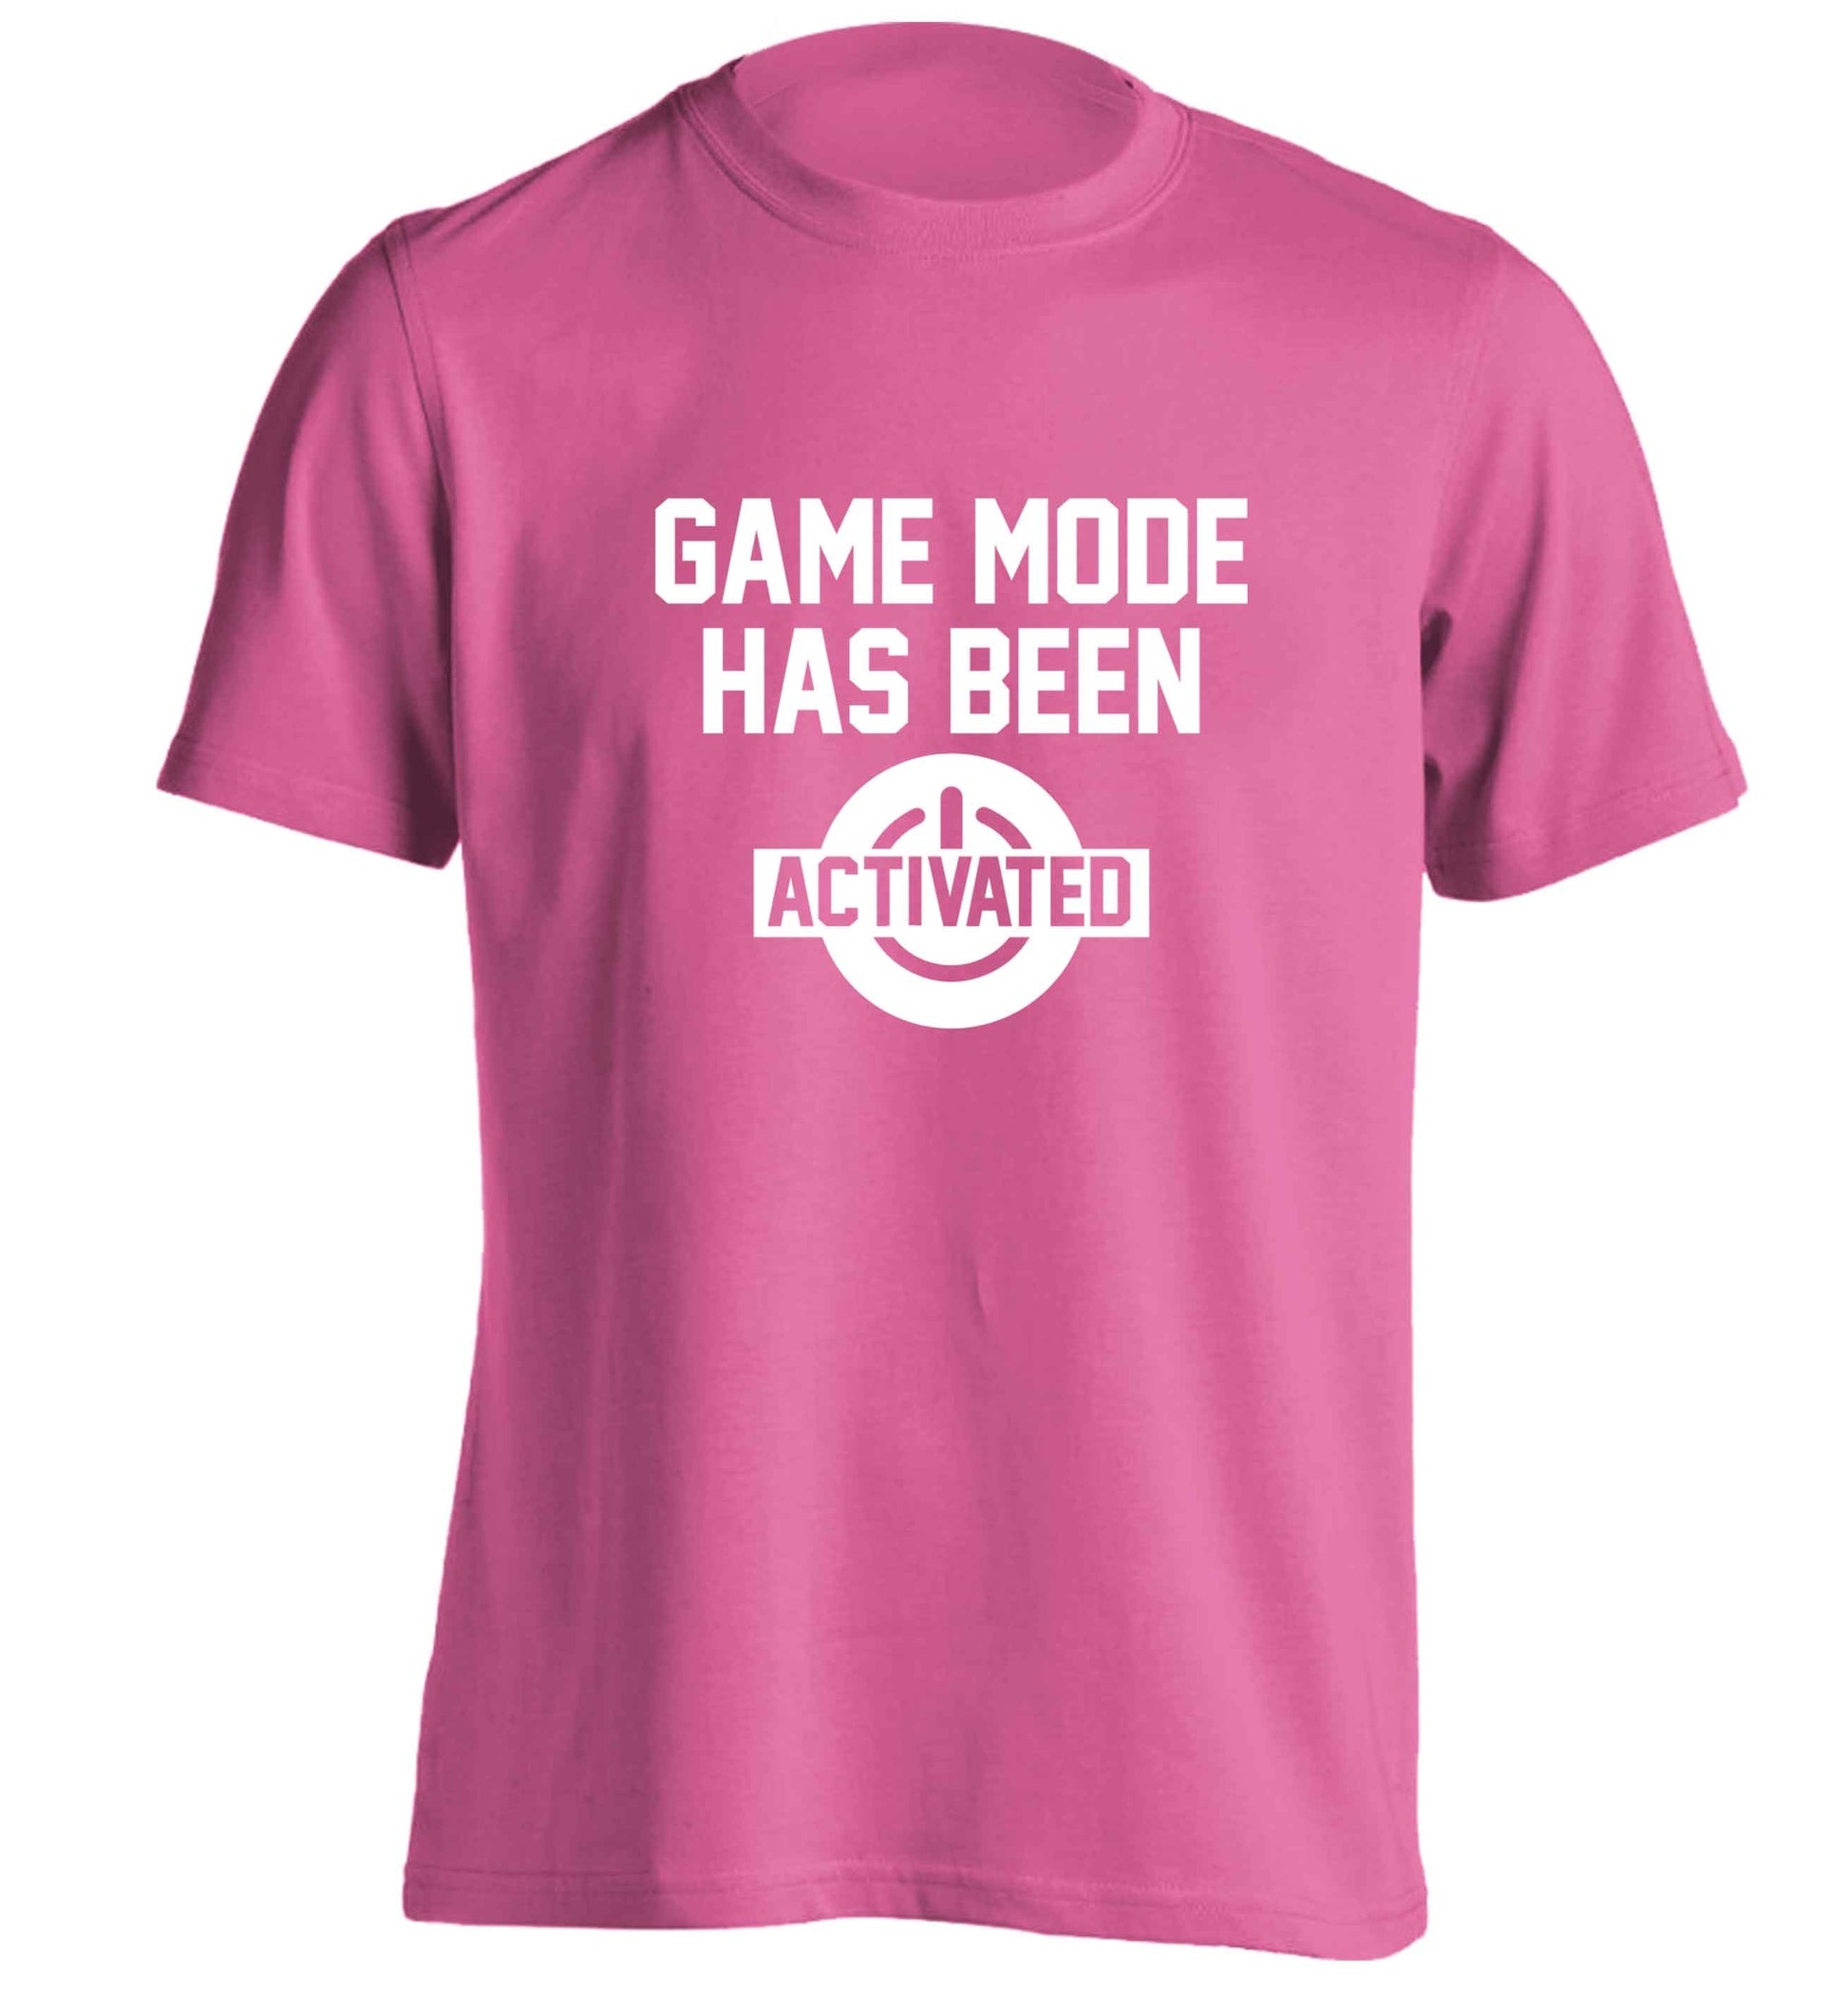 Game mode has been activated adults unisex pink Tshirt 2XL